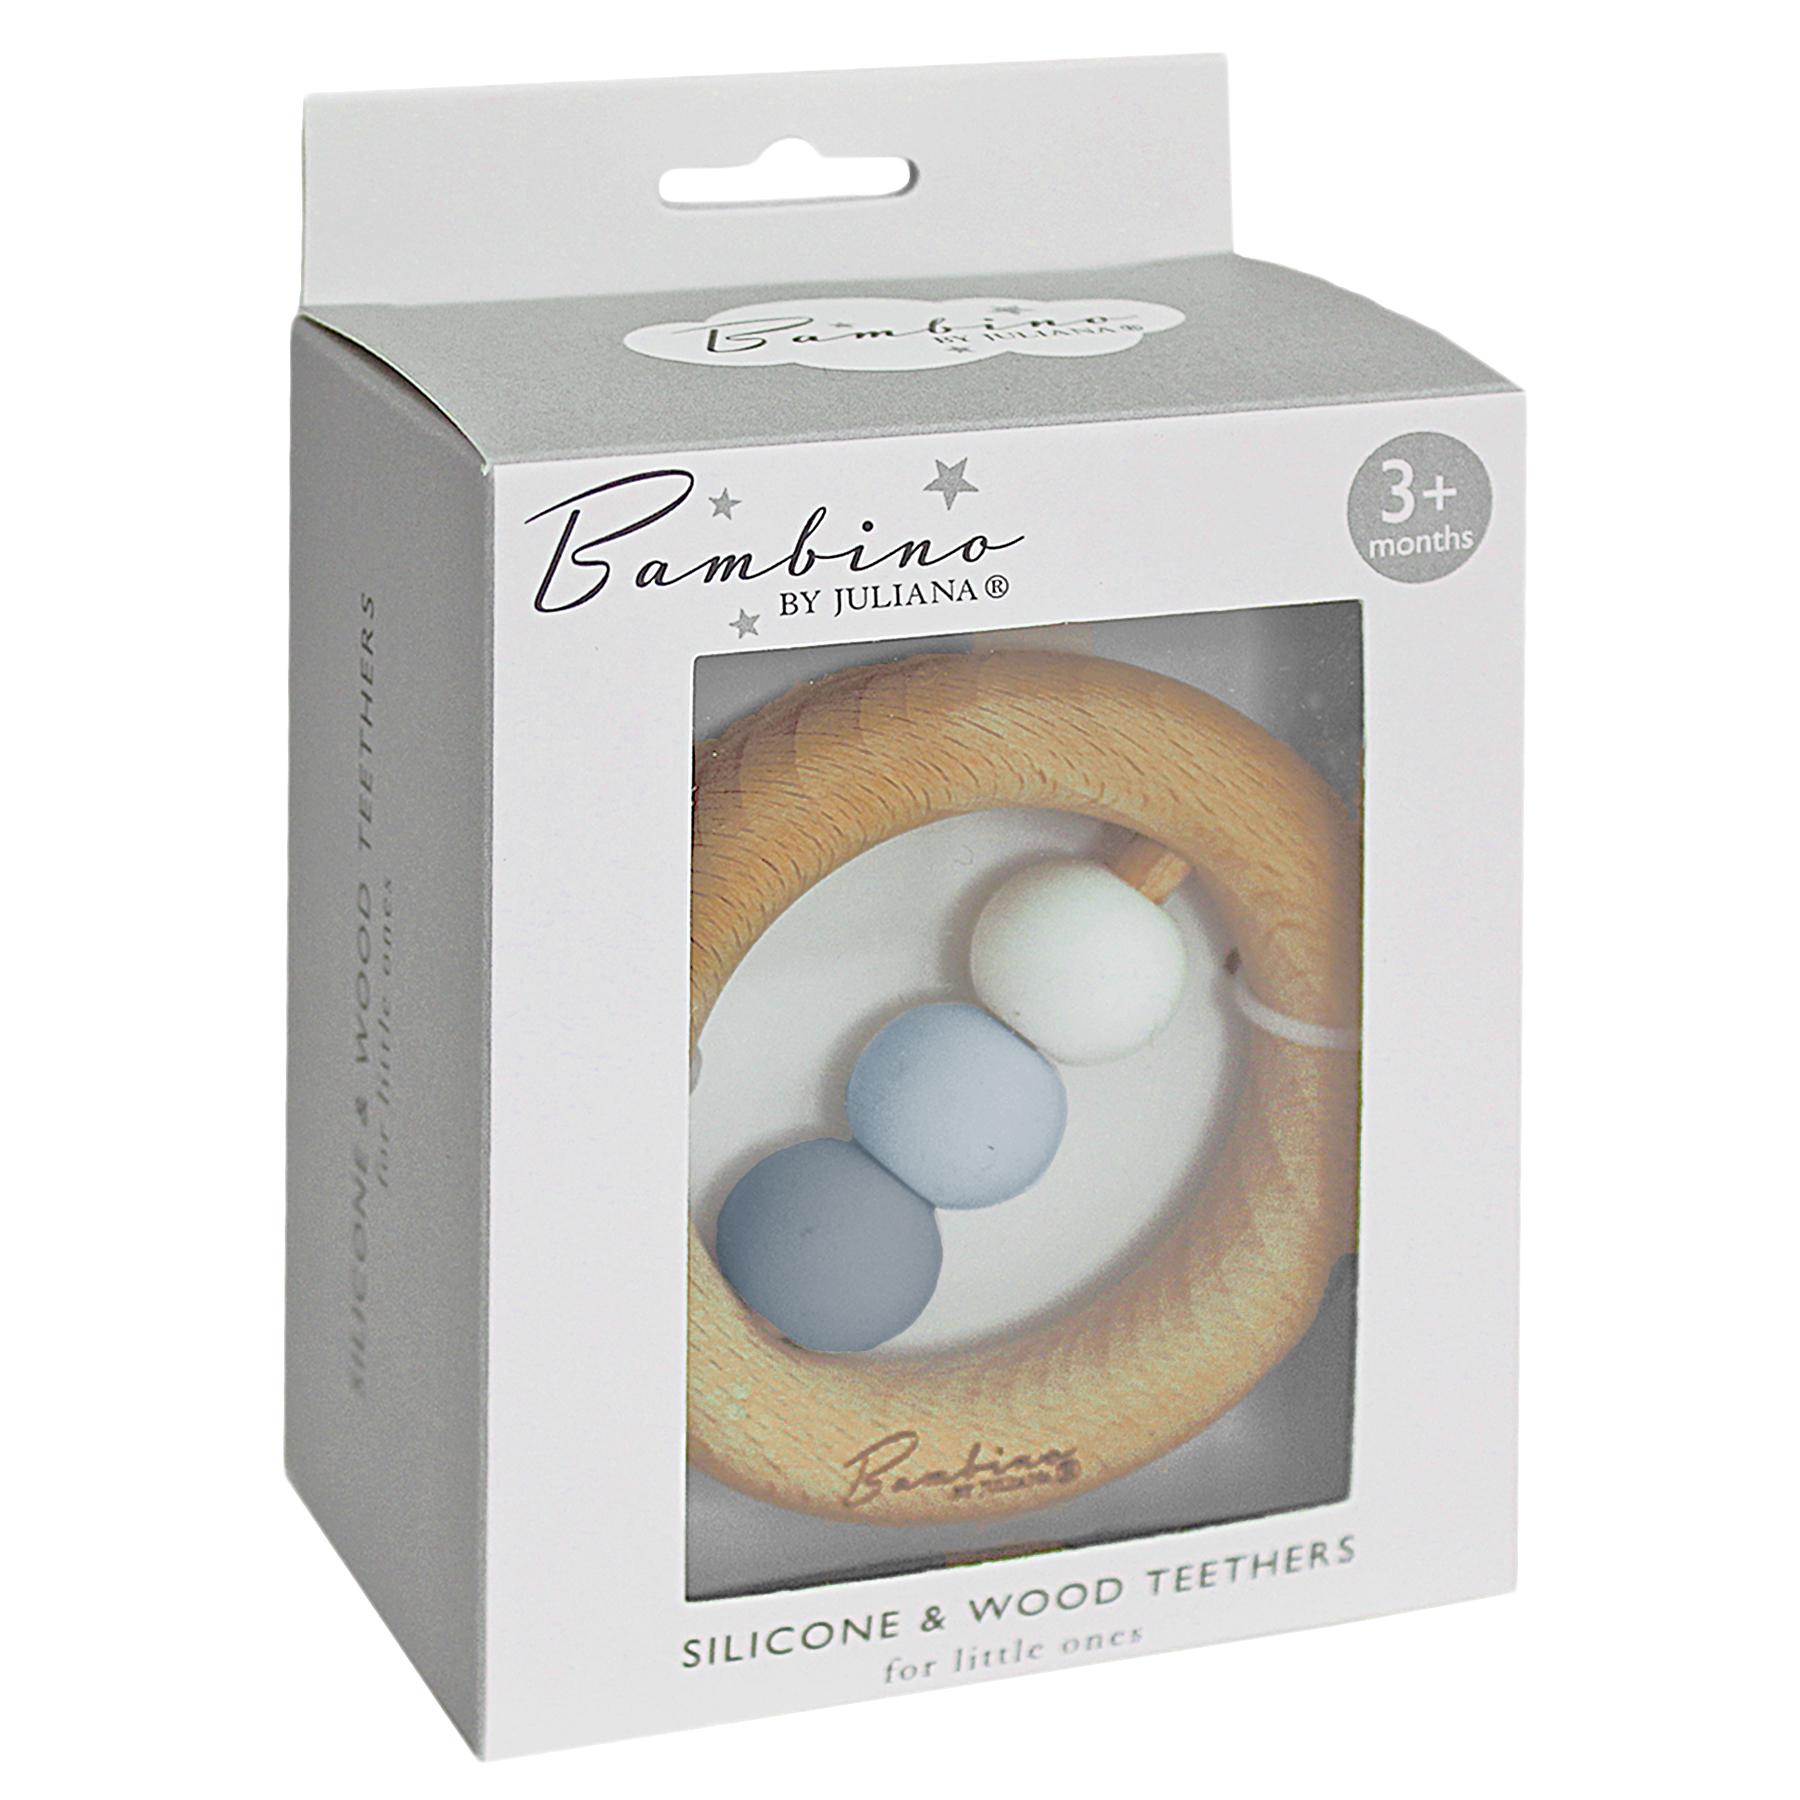 Bambino by Juliana® Round Silicone Blue Beads & Wood Teether Boxed